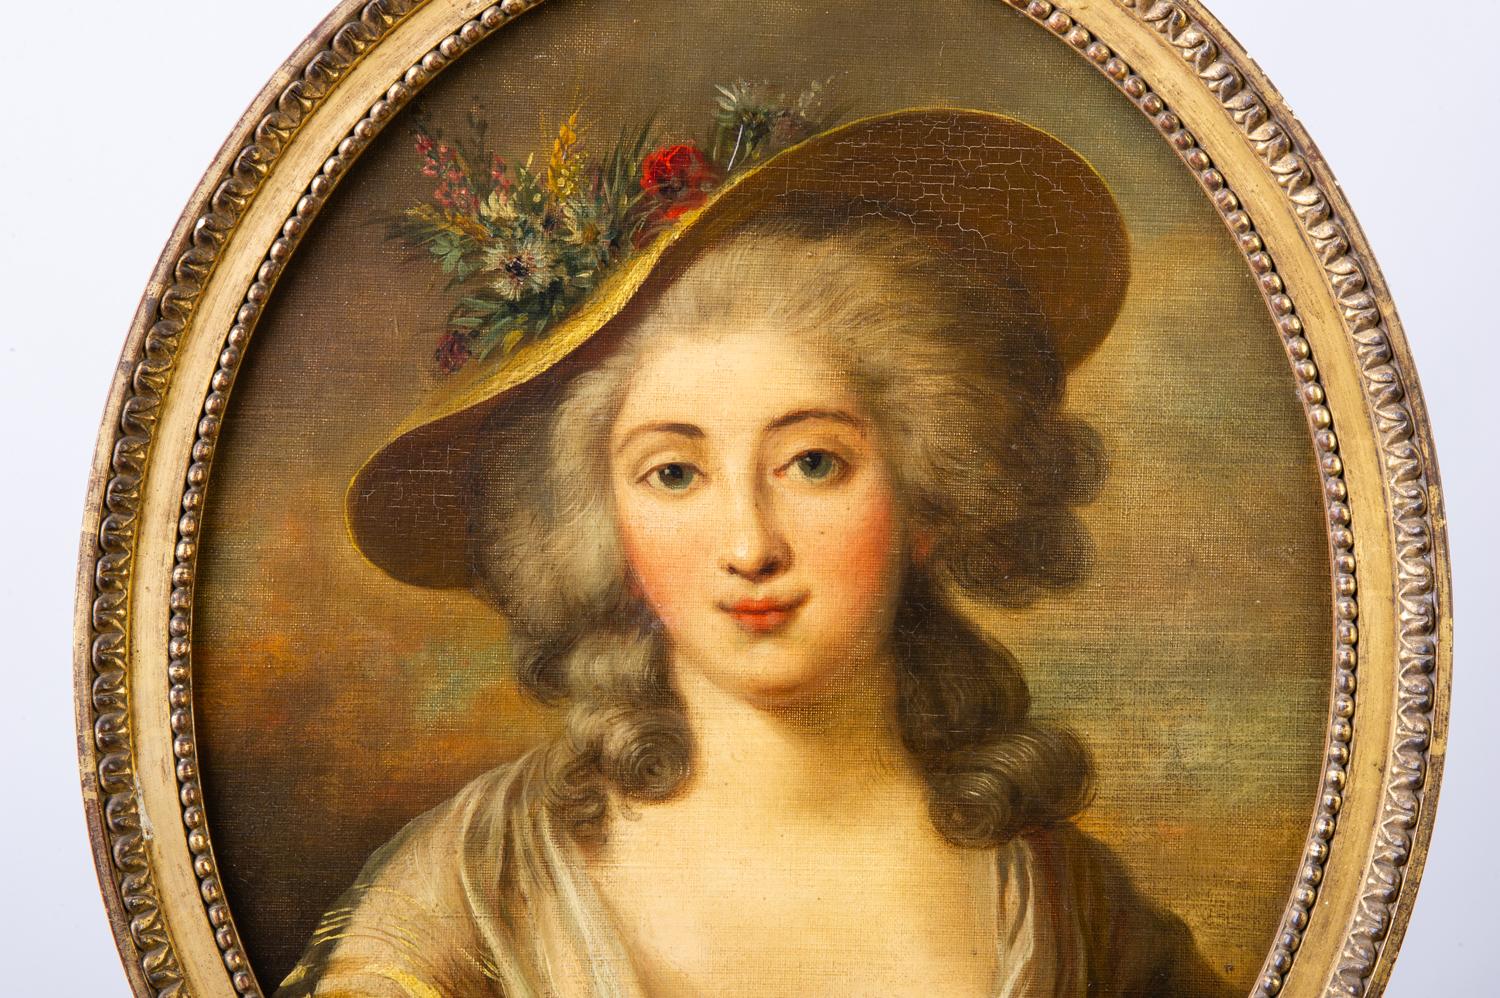 painting of a smiling maiden